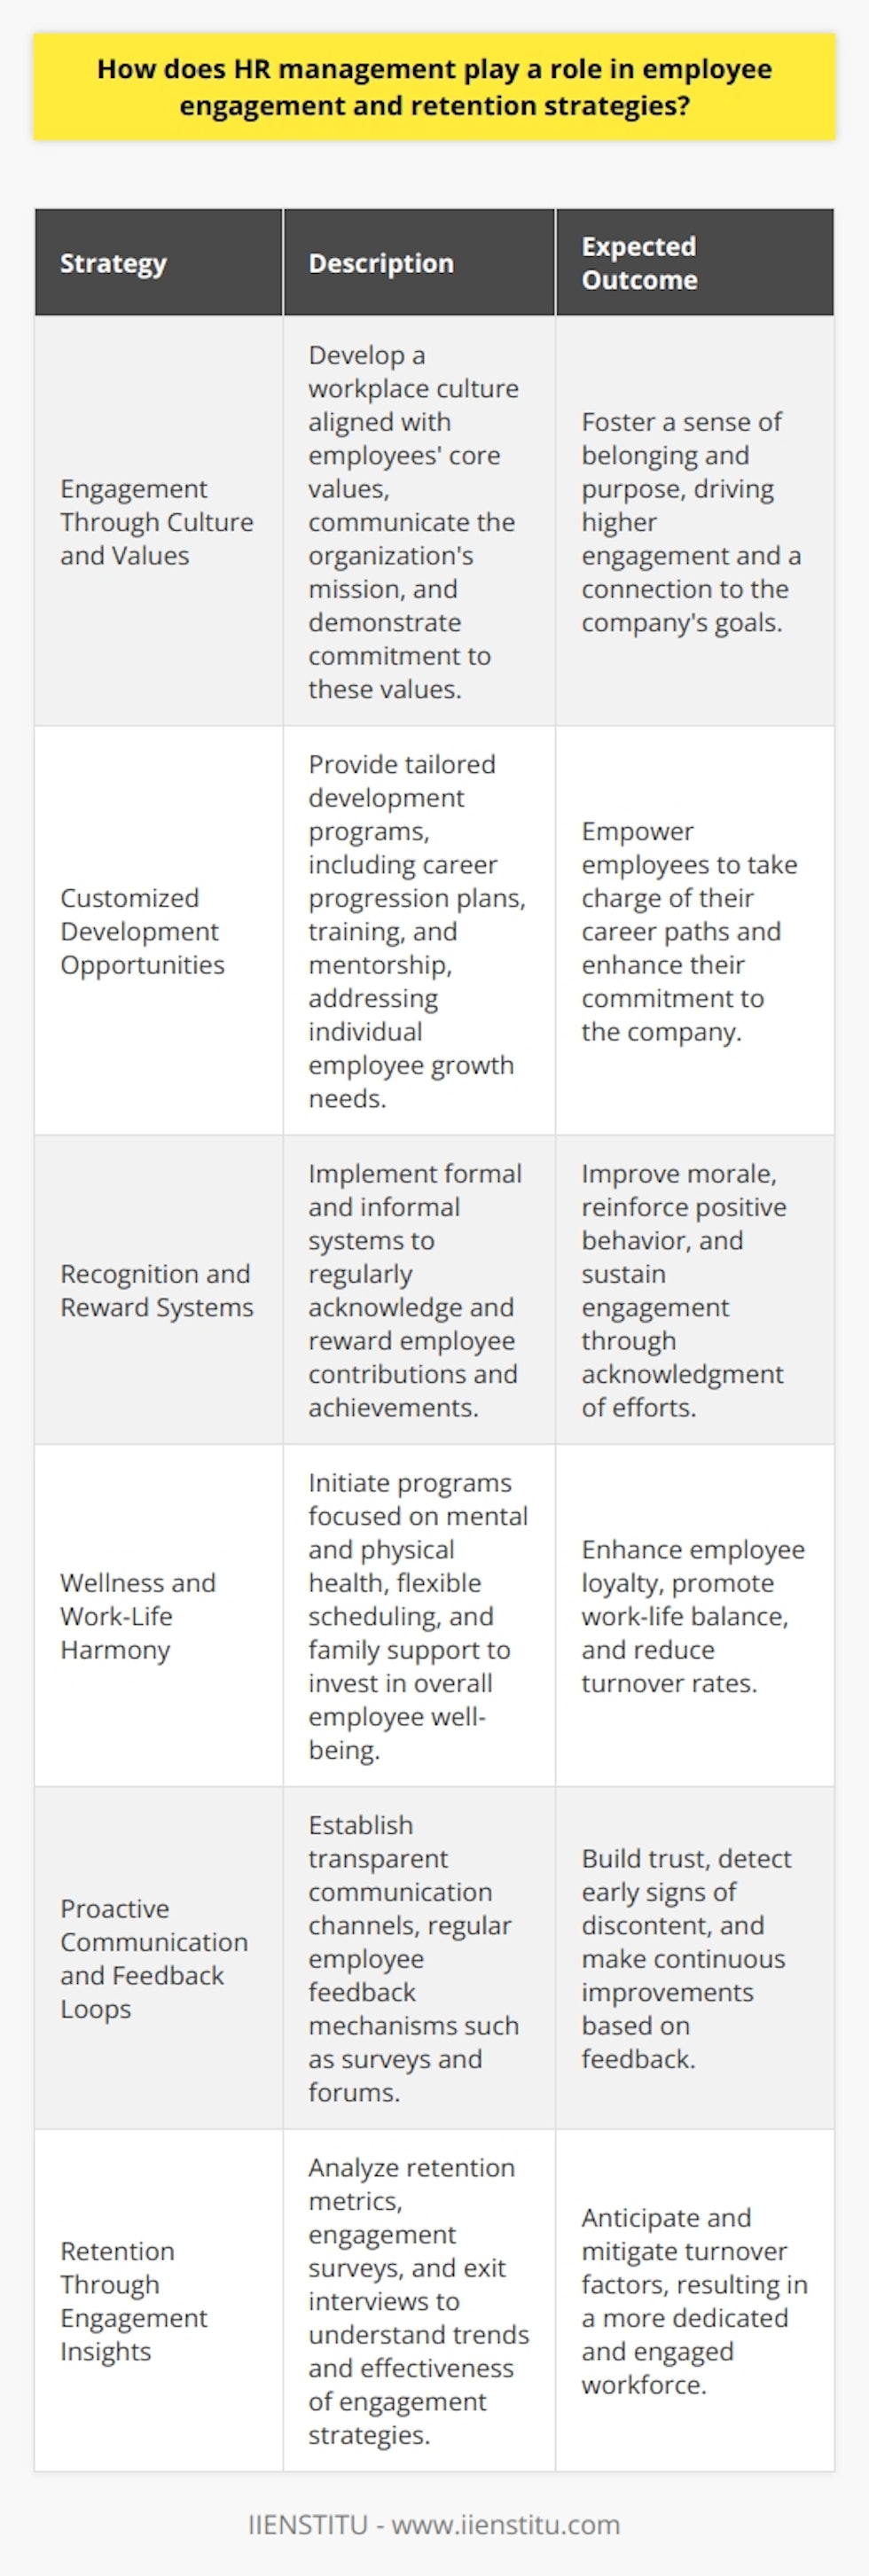 HR management is the cornerstone of cultivating a solid relationship between an organization and its employees, which is essential for high employee engagement and successful retention. The strategies developed and executed by HR professionals are paramount in ensuring employees remain committed to the company's goals and feel motivated to contribute their best work.**Engagement Through Culture and Values**A pivotal strategy includes establishing a workplace culture that aligns with the core values of employees. HR must effectively communicate and demonstrate the organization’s values, ensuring they resonate with the workforce. This can foster a sense of belonging and purpose among employees, driving engagement as they see a direct connection between their day-to-day work and the broader mission of the company.**Customized Development Opportunities**Recognizing that one size does not fit all, HR management increasingly tailors development programs to individual employee needs—focusing on career progression plans, training, and mentorship opportunities. By providing resources that cater to employees' professional growth, HR management empowers staff members to take charge of their career paths, thus enhancing their investment in the company.**Recognition and Reward Systems**Employee recognition is another vital tool in HR's arsenal. Regular, meaningful recognition of employees’ contributions, through both formal reward systems and informal acknowledgment, bolsters morale and encourages continued excellence. By recognizing achievements, HR reinforces positive behaviors and the value of employees’ efforts, directly contributing to sustained engagement.**Wellness and Work-Life Harmony**Employee wellbeing also comes under the purview of HR management, where initiatives focus on mental and physical health, as well as work-life harmony. By providing resources such as counseling services, flexible work schedules, and family support programs, HR demonstrates a commitment to employees' overall well-being, which in turn enhances loyalty and reduces turnover rates.**Proactive Communication and Feedback Loops**Effective communication channels are essential for gauging engagement levels. By establishing regular feedback loops such as surveys and forums, HR can tap into employee sentiment, allowing them to swiftly address areas of discontent. Transparent communication also builds trust, an essential ingredient for a committed workforce.**Retention Through Engagement Insights**Finally, HR's role in retention is heavily data-driven, relying on engagement surveys, retention metrics, and exit interview analyses to inform strategy. This data provides valuable insights into trends, potential issues, and the effectiveness of current engagement programs. By continually refining strategies based on data-driven insights, HR can anticipate and mitigate factors that lead to turnover, securing a dedicated and engaged workforce.In delivering these strategies, organizations such as IIENSTITU, with a focus on online education and certification for various professional disciplines including HR management, play a significant role in equipping HR professionals with the latest knowledge and skills necessary for cultivating engagement and reducing turnover.To summarize, HR management's intricate understanding of the workforce and strategic deployment of engagement and retention initiatives are crucial for creating a supportive, inspiring, and resilient organizational structure. HR leads the way in nurturing employee connections, ensuring a workplace that not only attracts top talent but also retains it, thereby safeguarding the organization's competitive edge and driving long-term success.